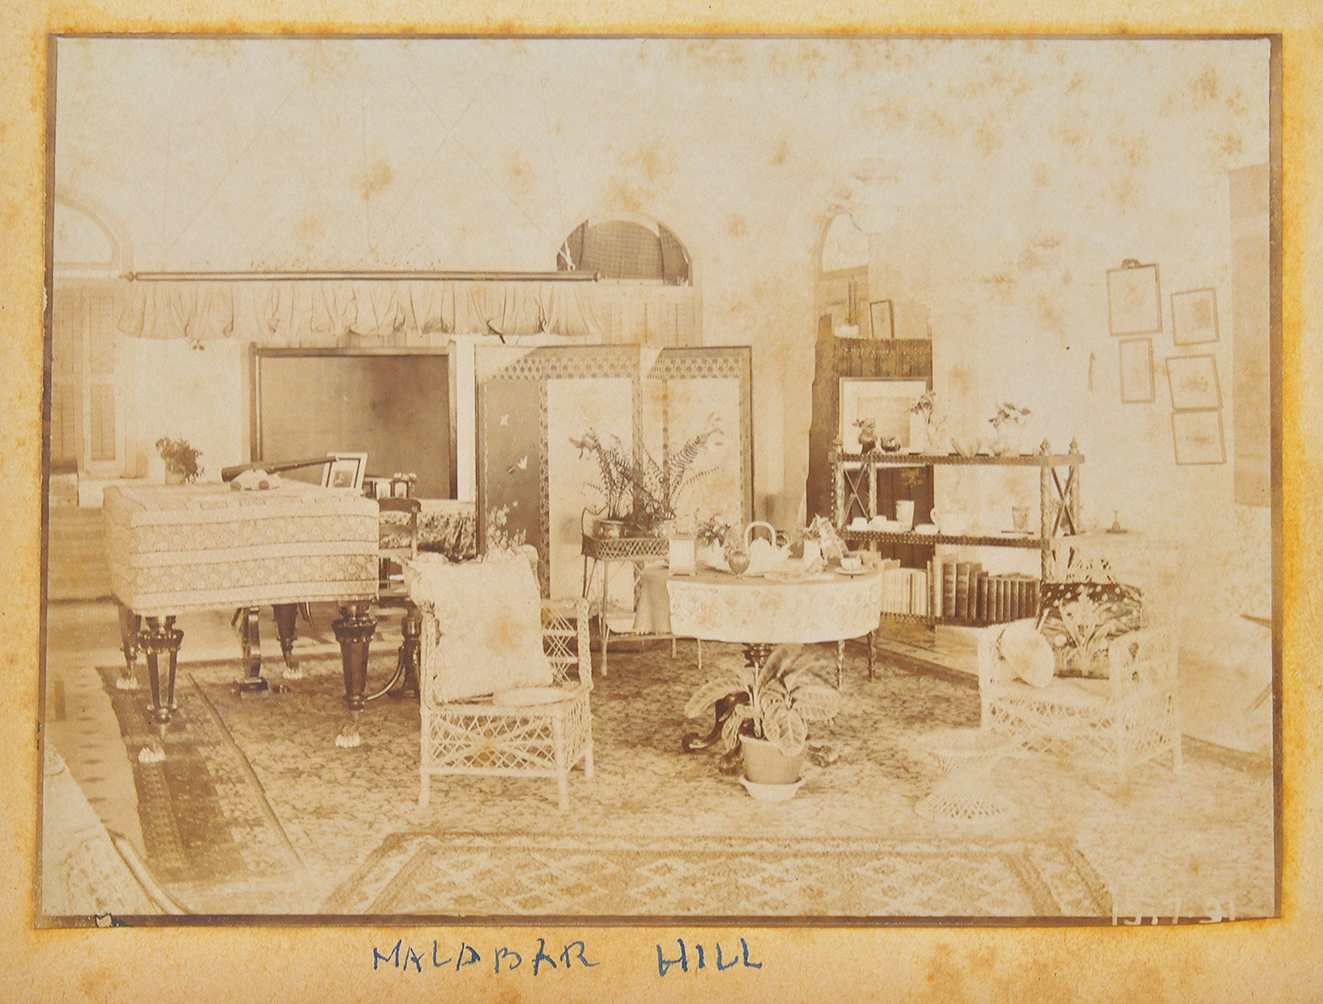 Malabar Hill Bungalow With Punkah - Old Photo 1890